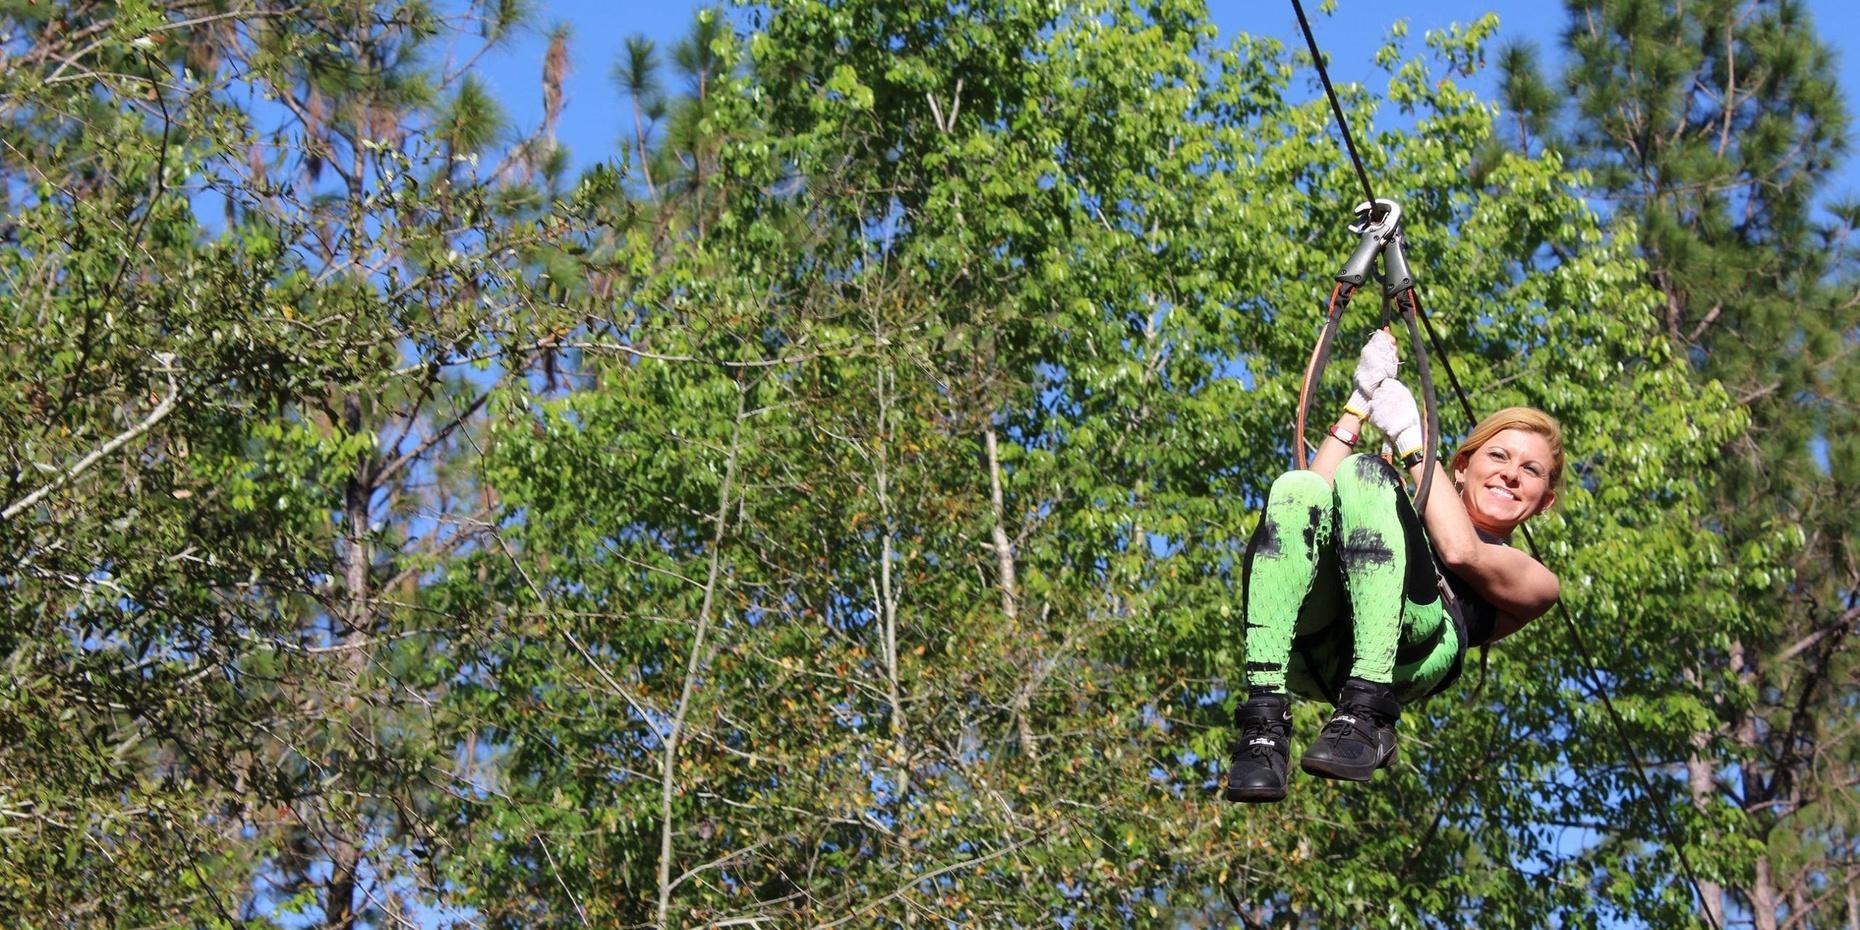 Tree Adventures Park Admission in Kissimmee